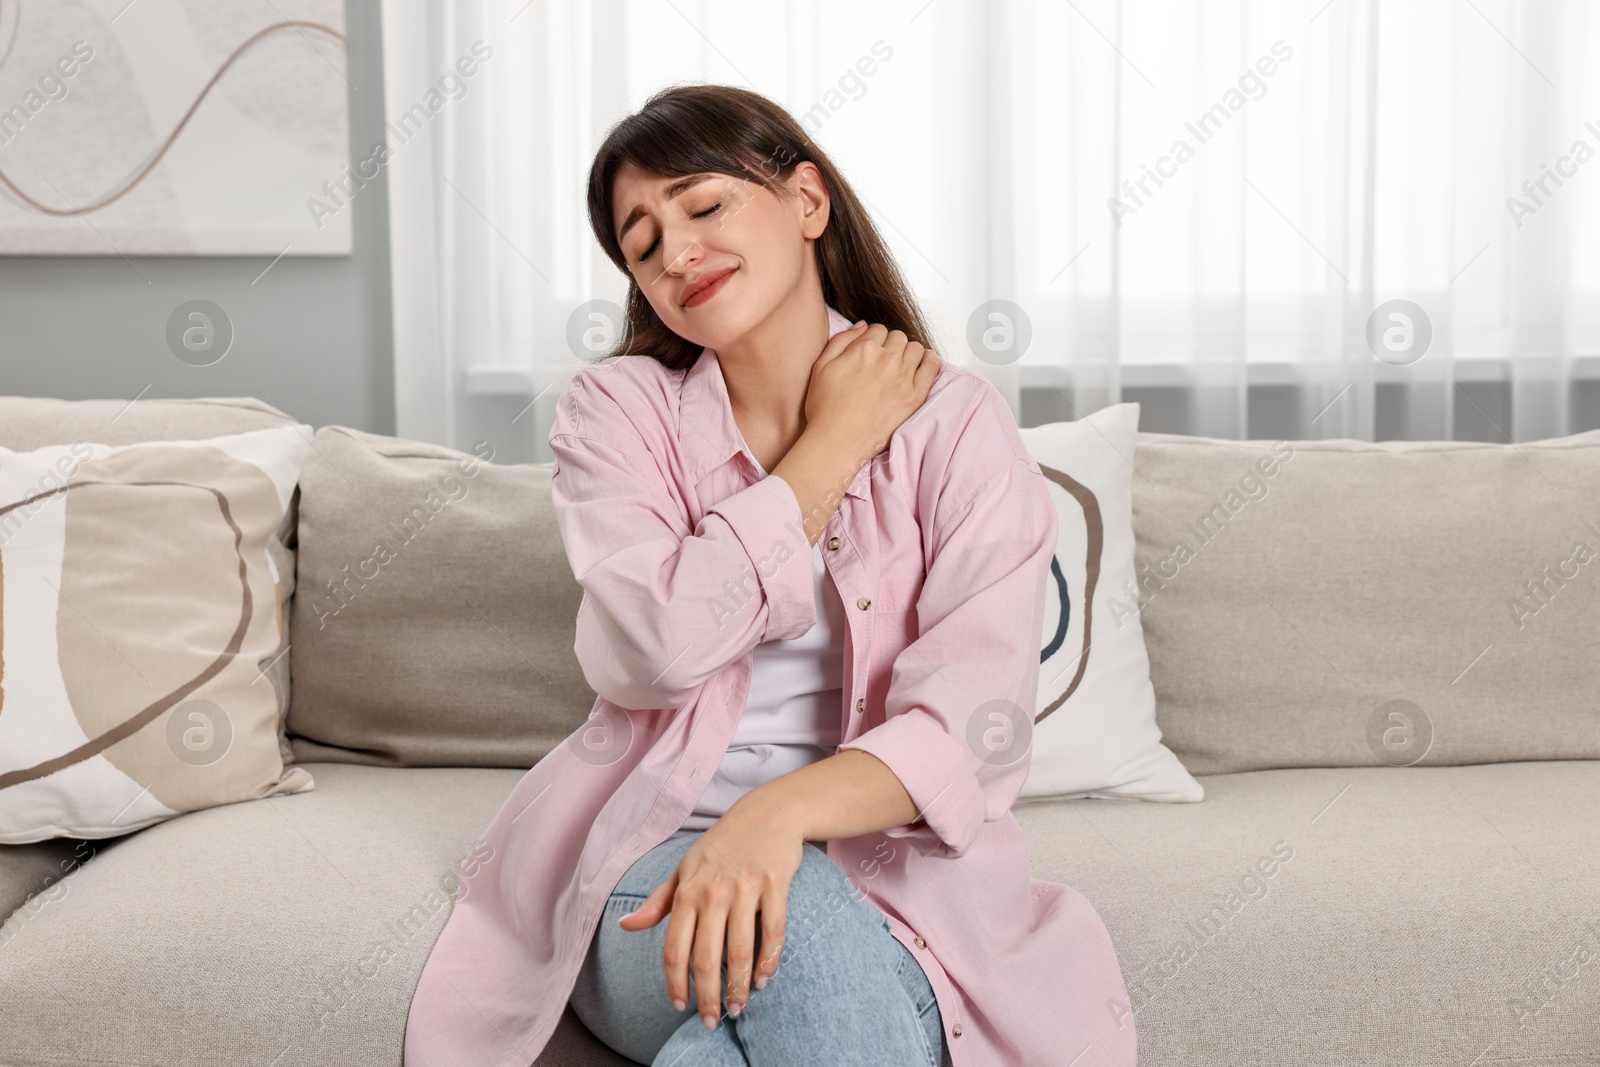 Photo of Upset woman suffering from neck pain on sofa at home